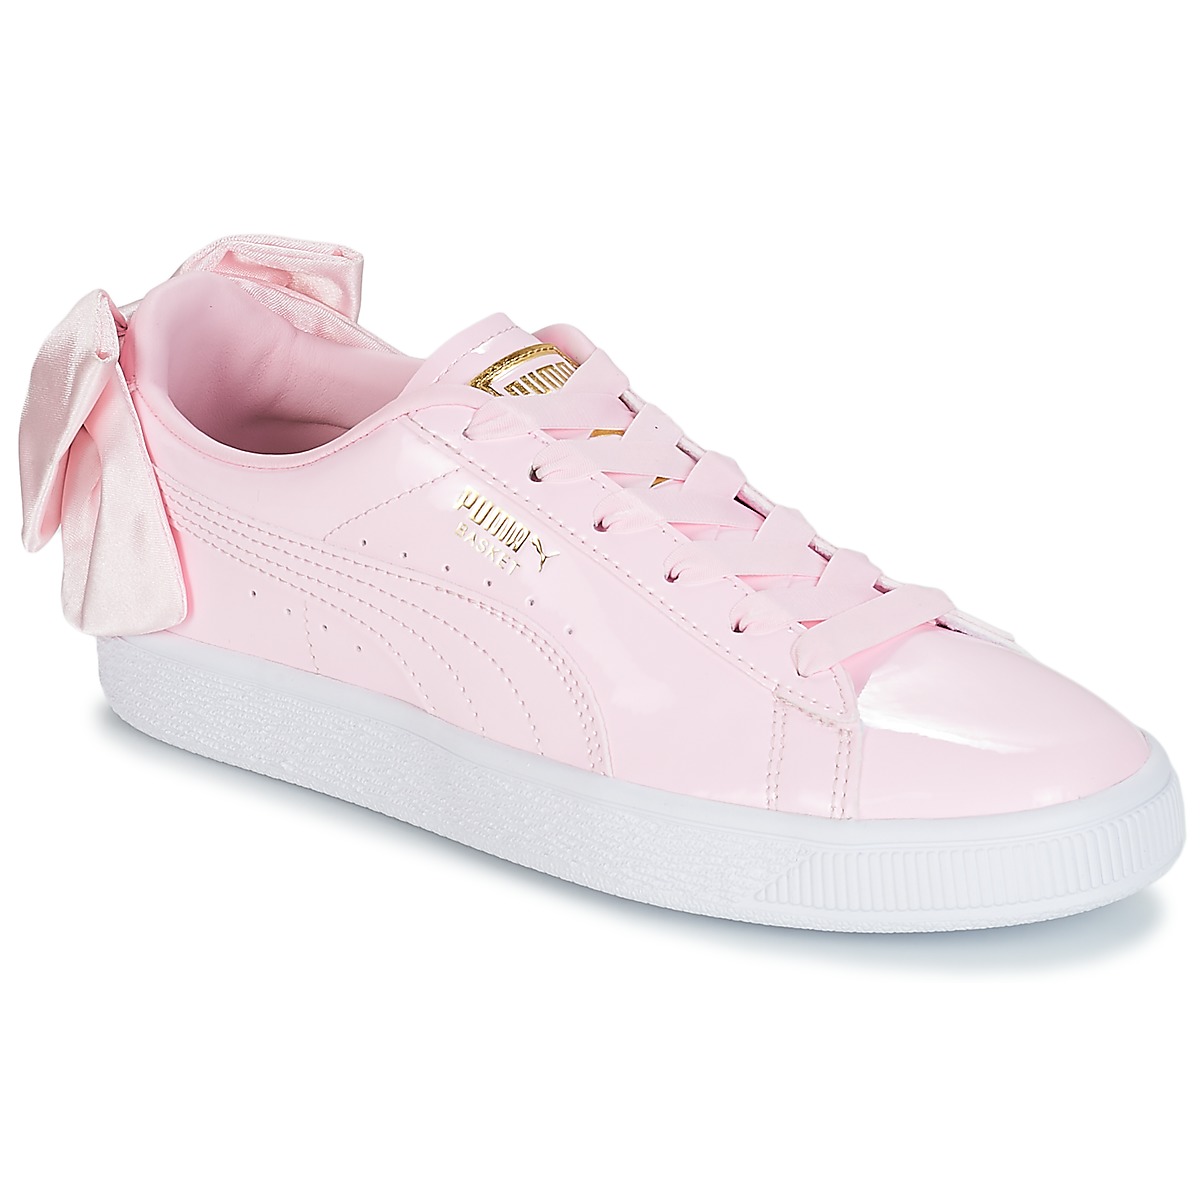 puma pink bow trainers, OFF 73%,daralca 